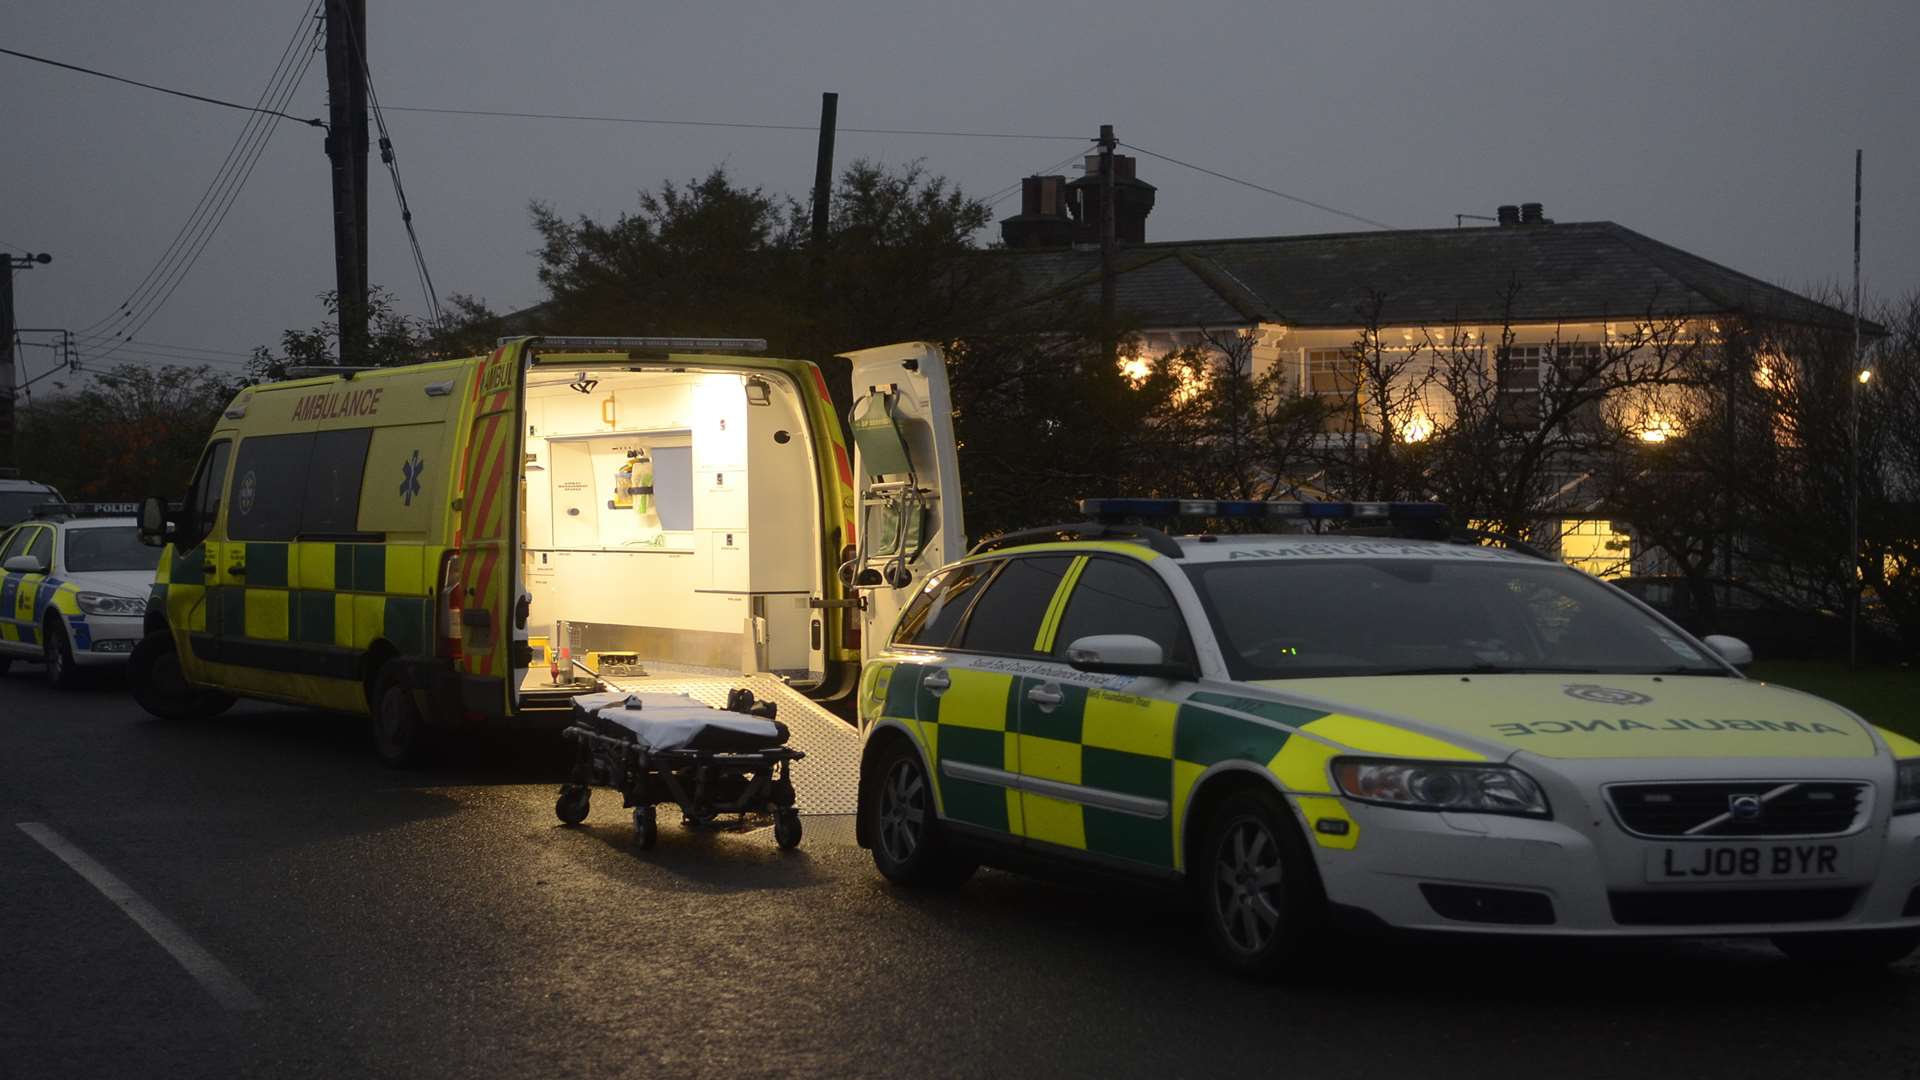 Emergency services were called to the incident near the Sportsman pub